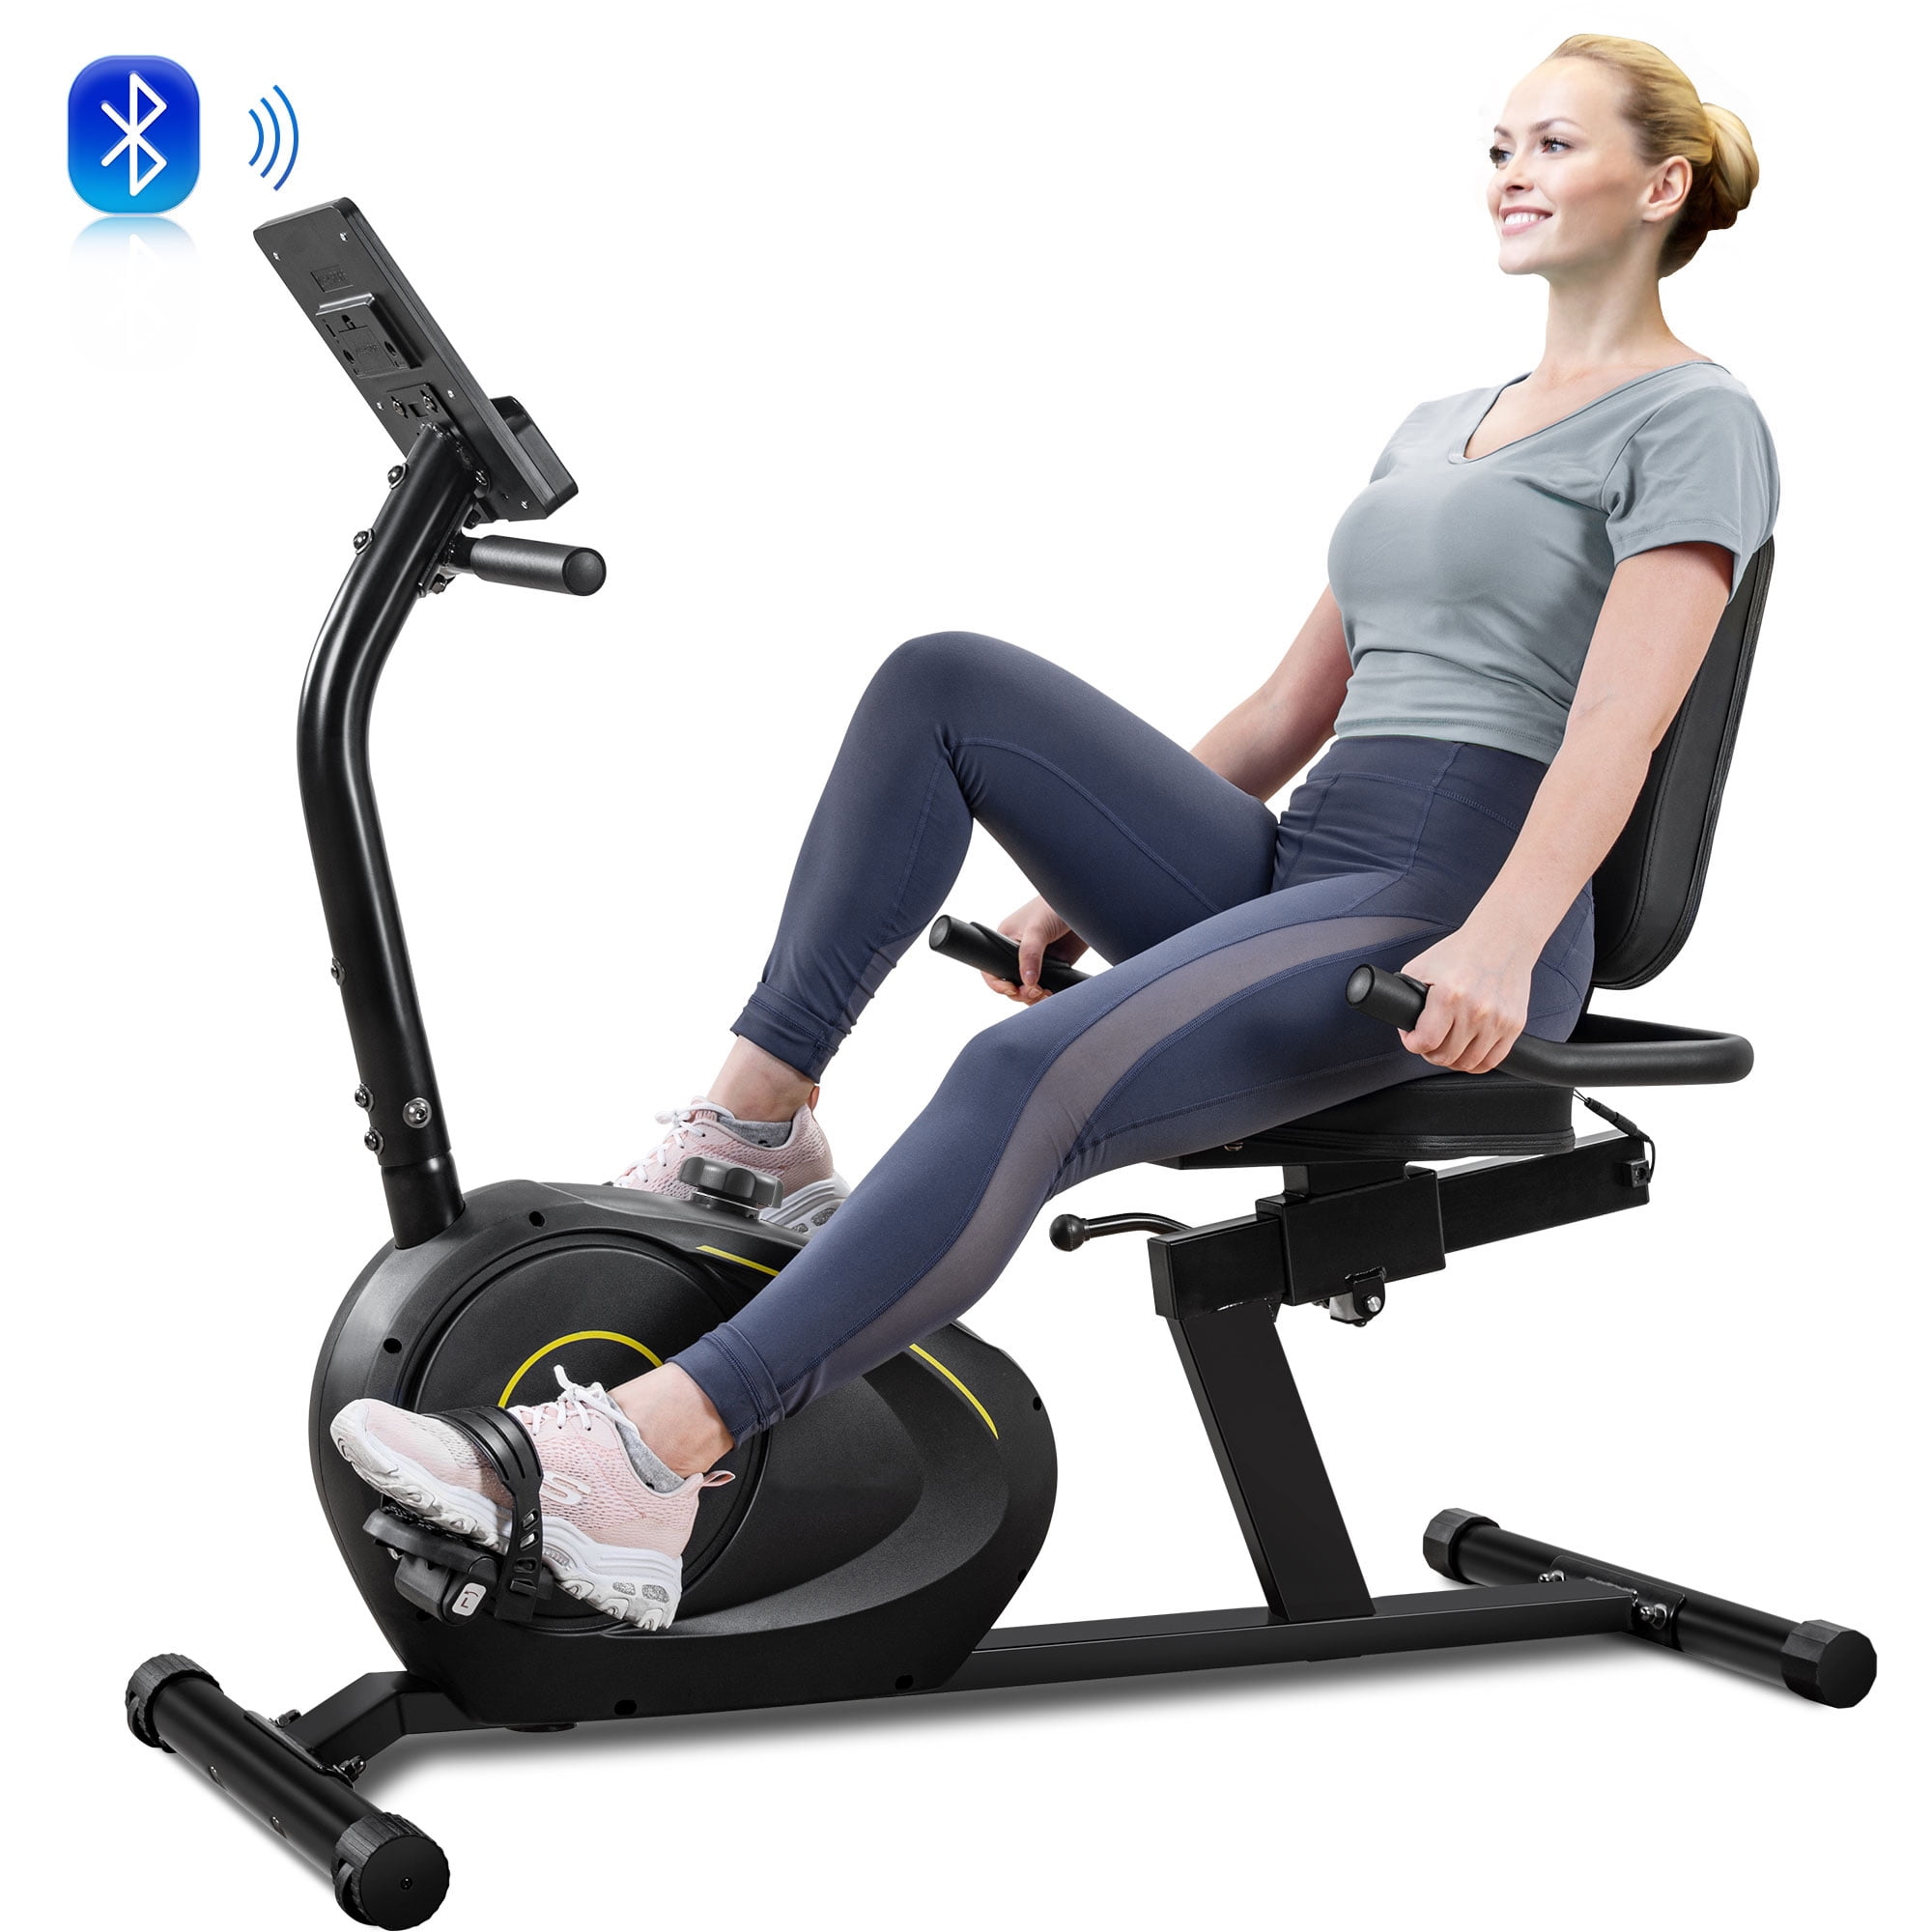 Indoor Exercise Bike, Recumbent Exercise Bike for Adults Seniors Workout and Physical Therapy